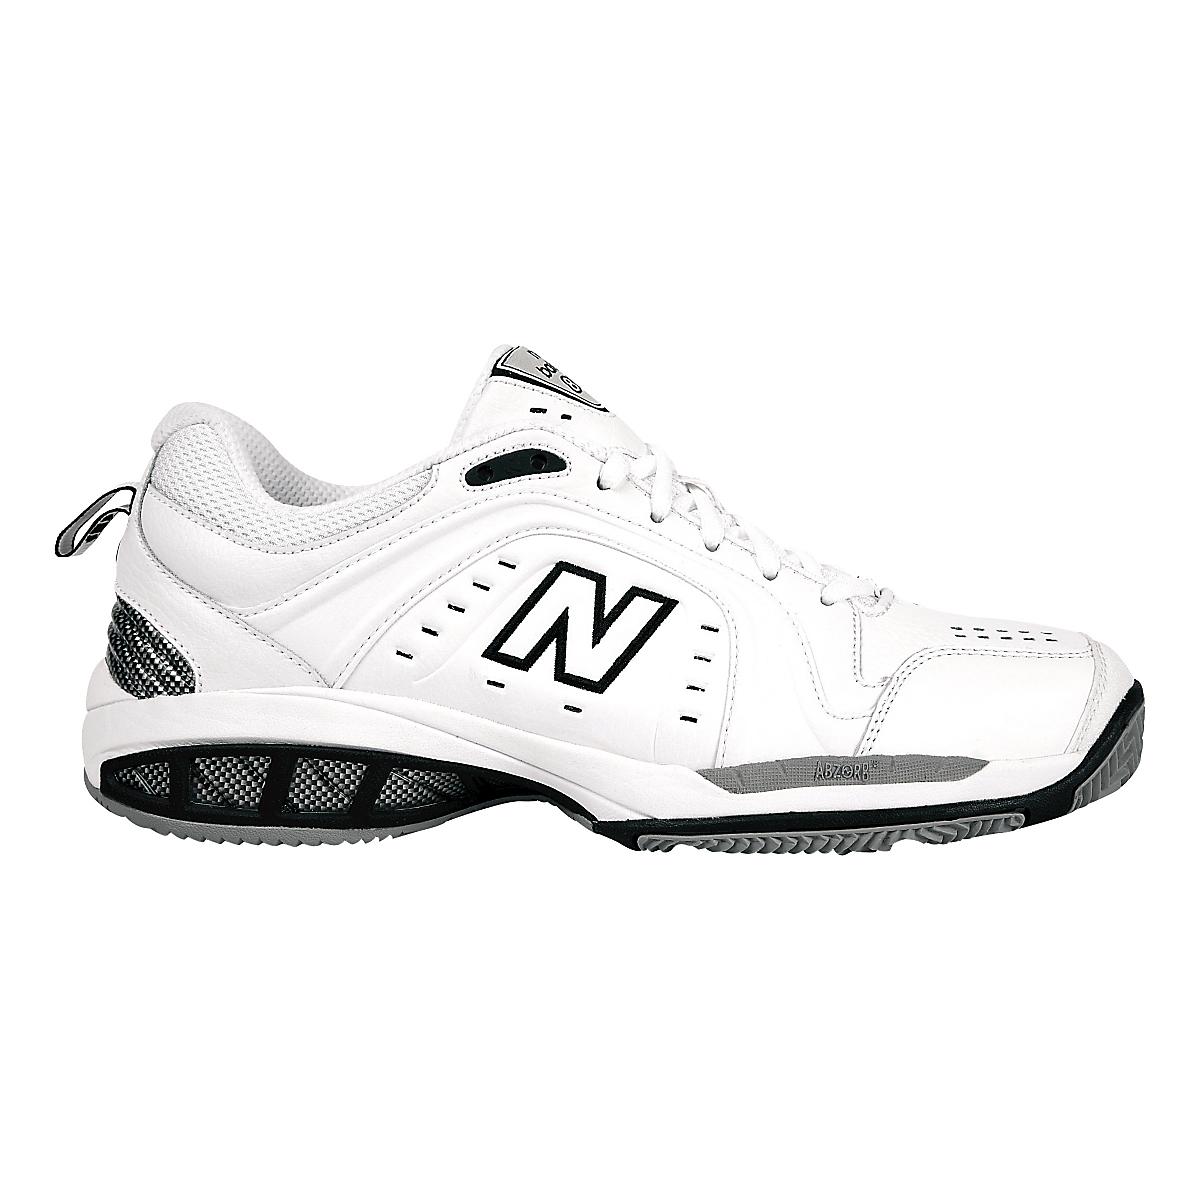 Mens New Balance 803 Court Shoe at Road Runner Sports